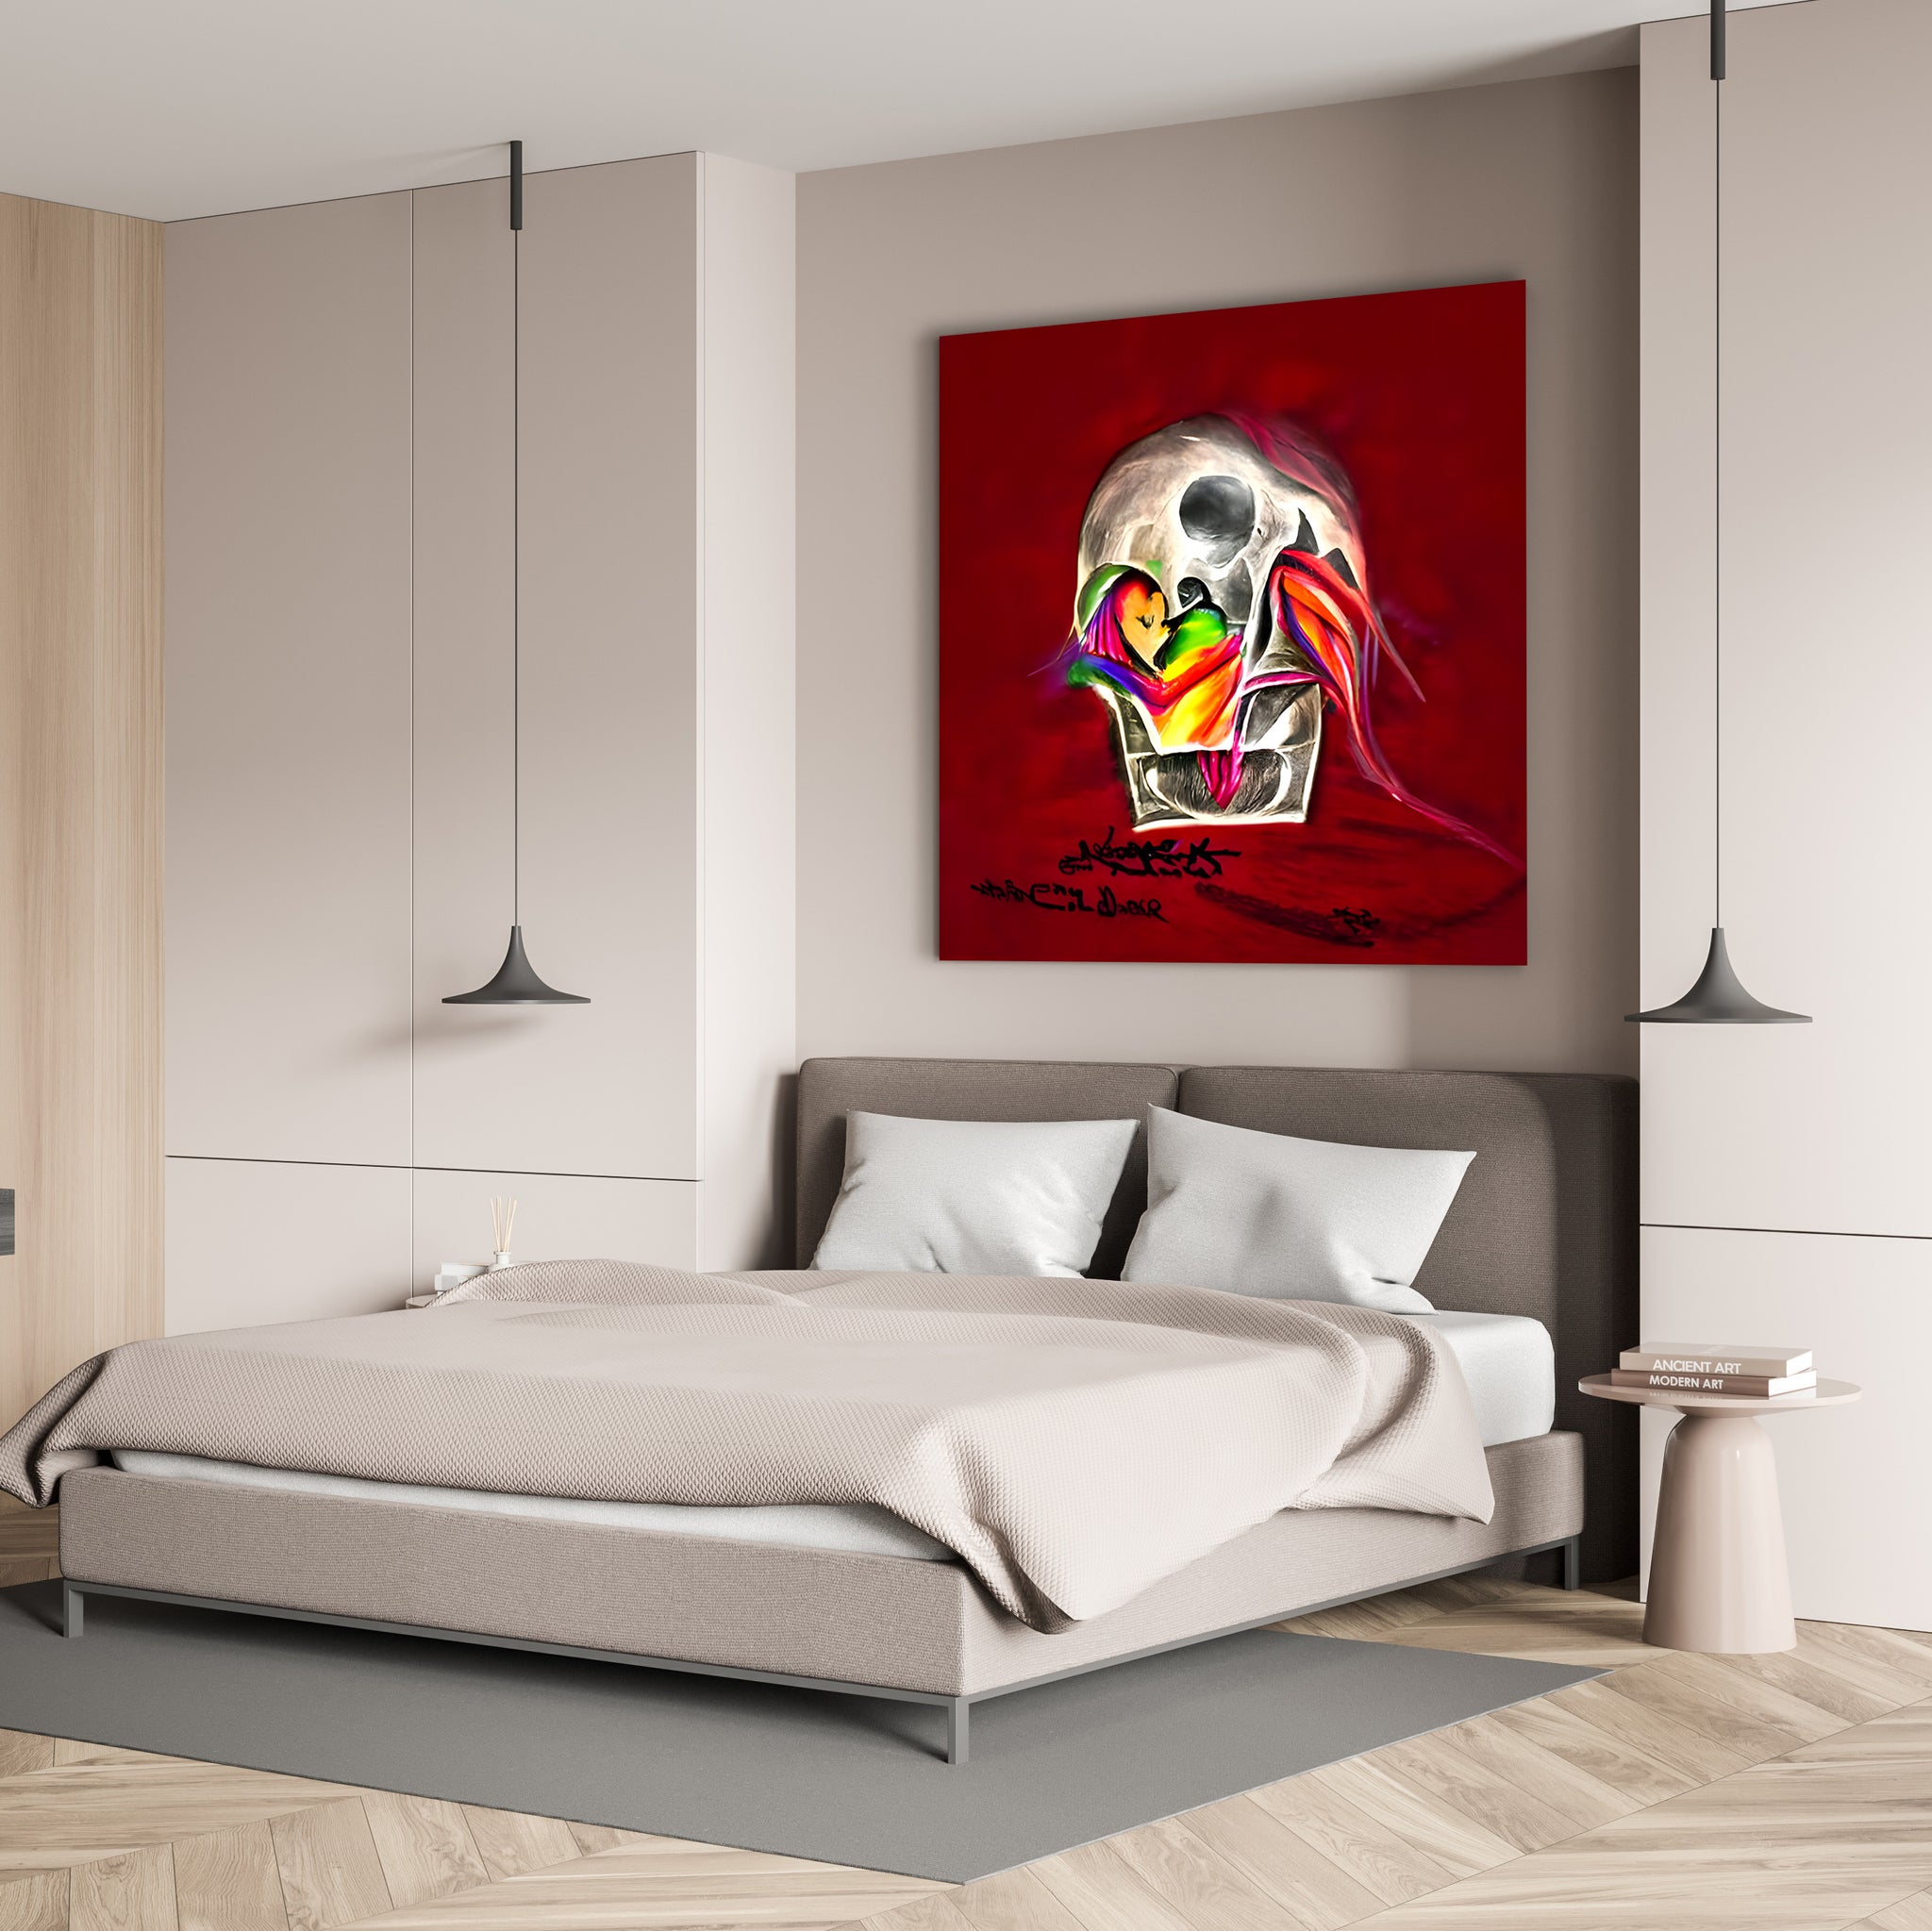 Death does not part, only the lack of love charcoal drawing acrylic art airbrush art colourful